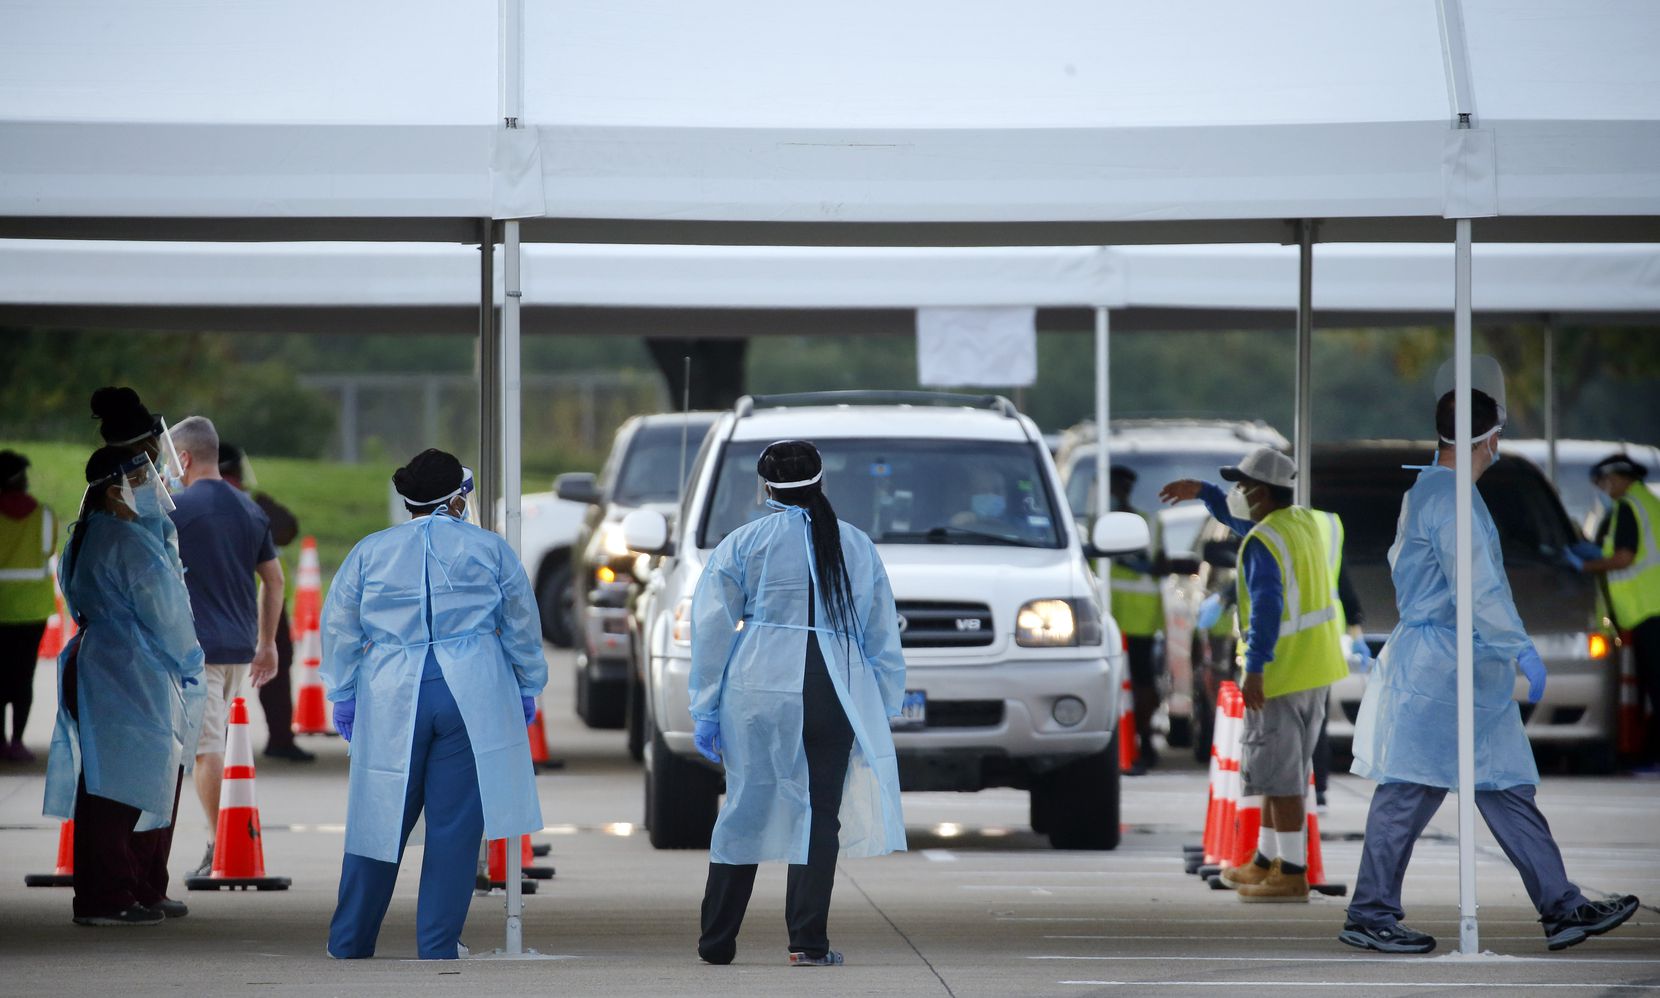 Medical personnel prep and conducted nasal swab tests at a drive-through COVID-19 testing site at Dallas College Eastfield Campus in Mesquite on Aug. 3, 2020.